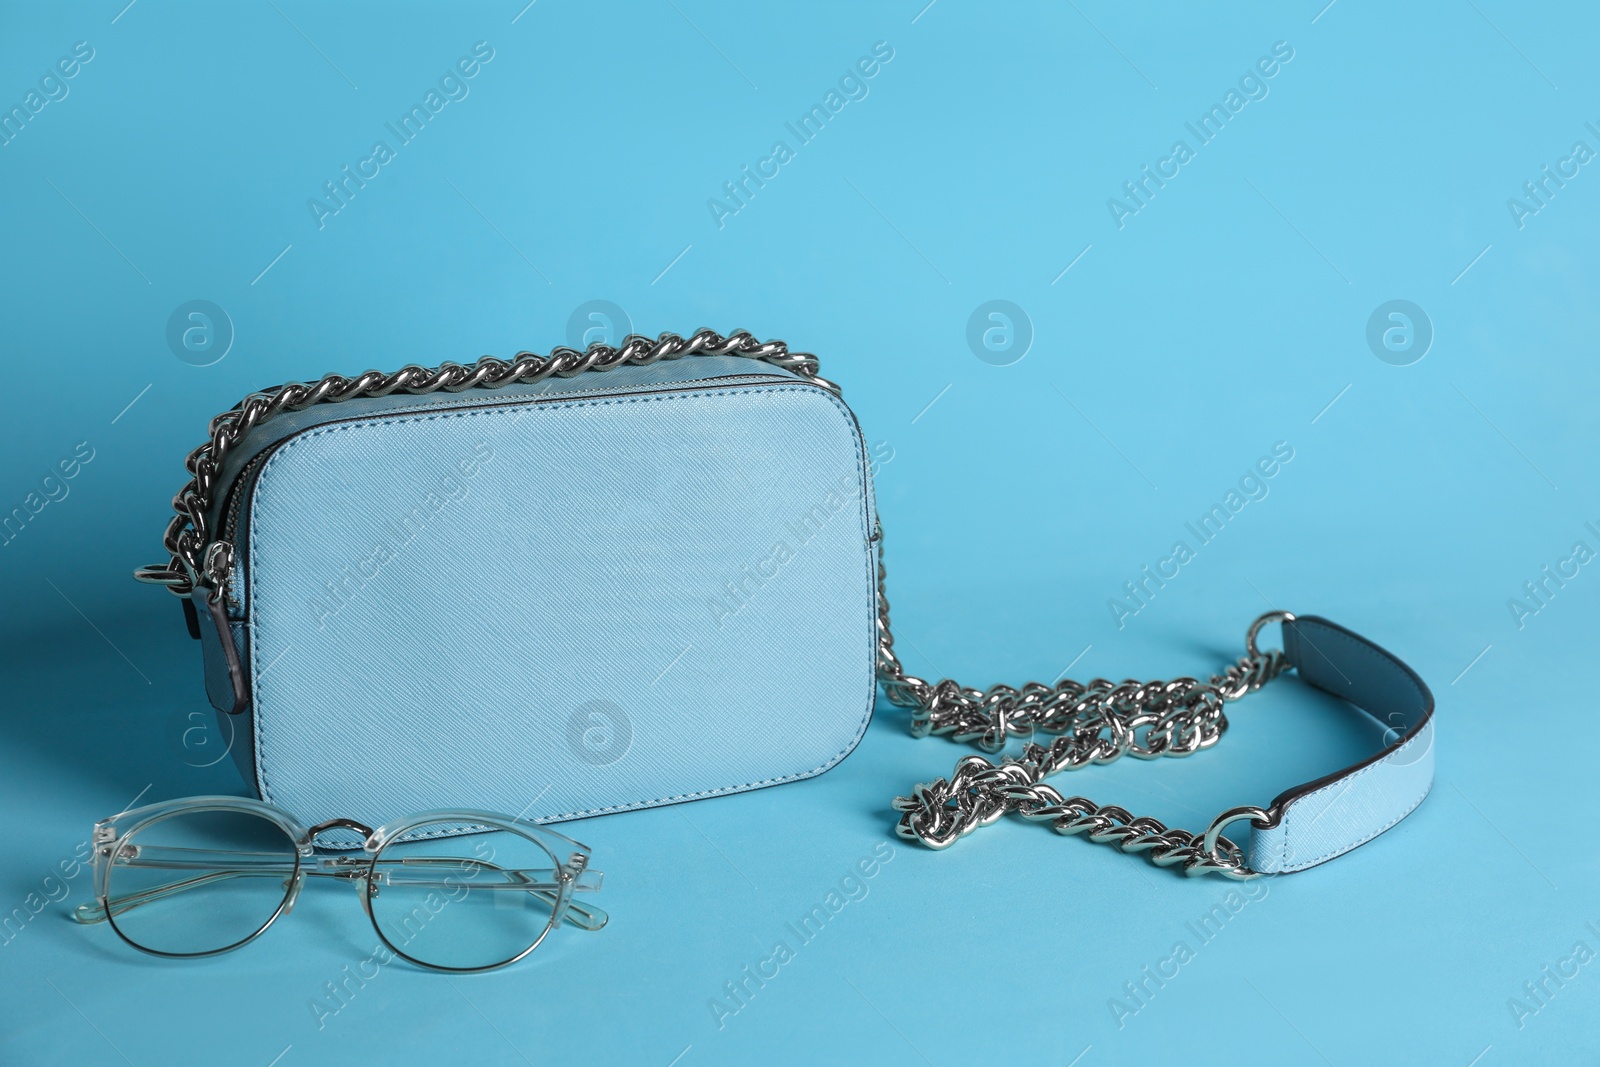 Photo of Stylish woman's bag and glasses on light blue background